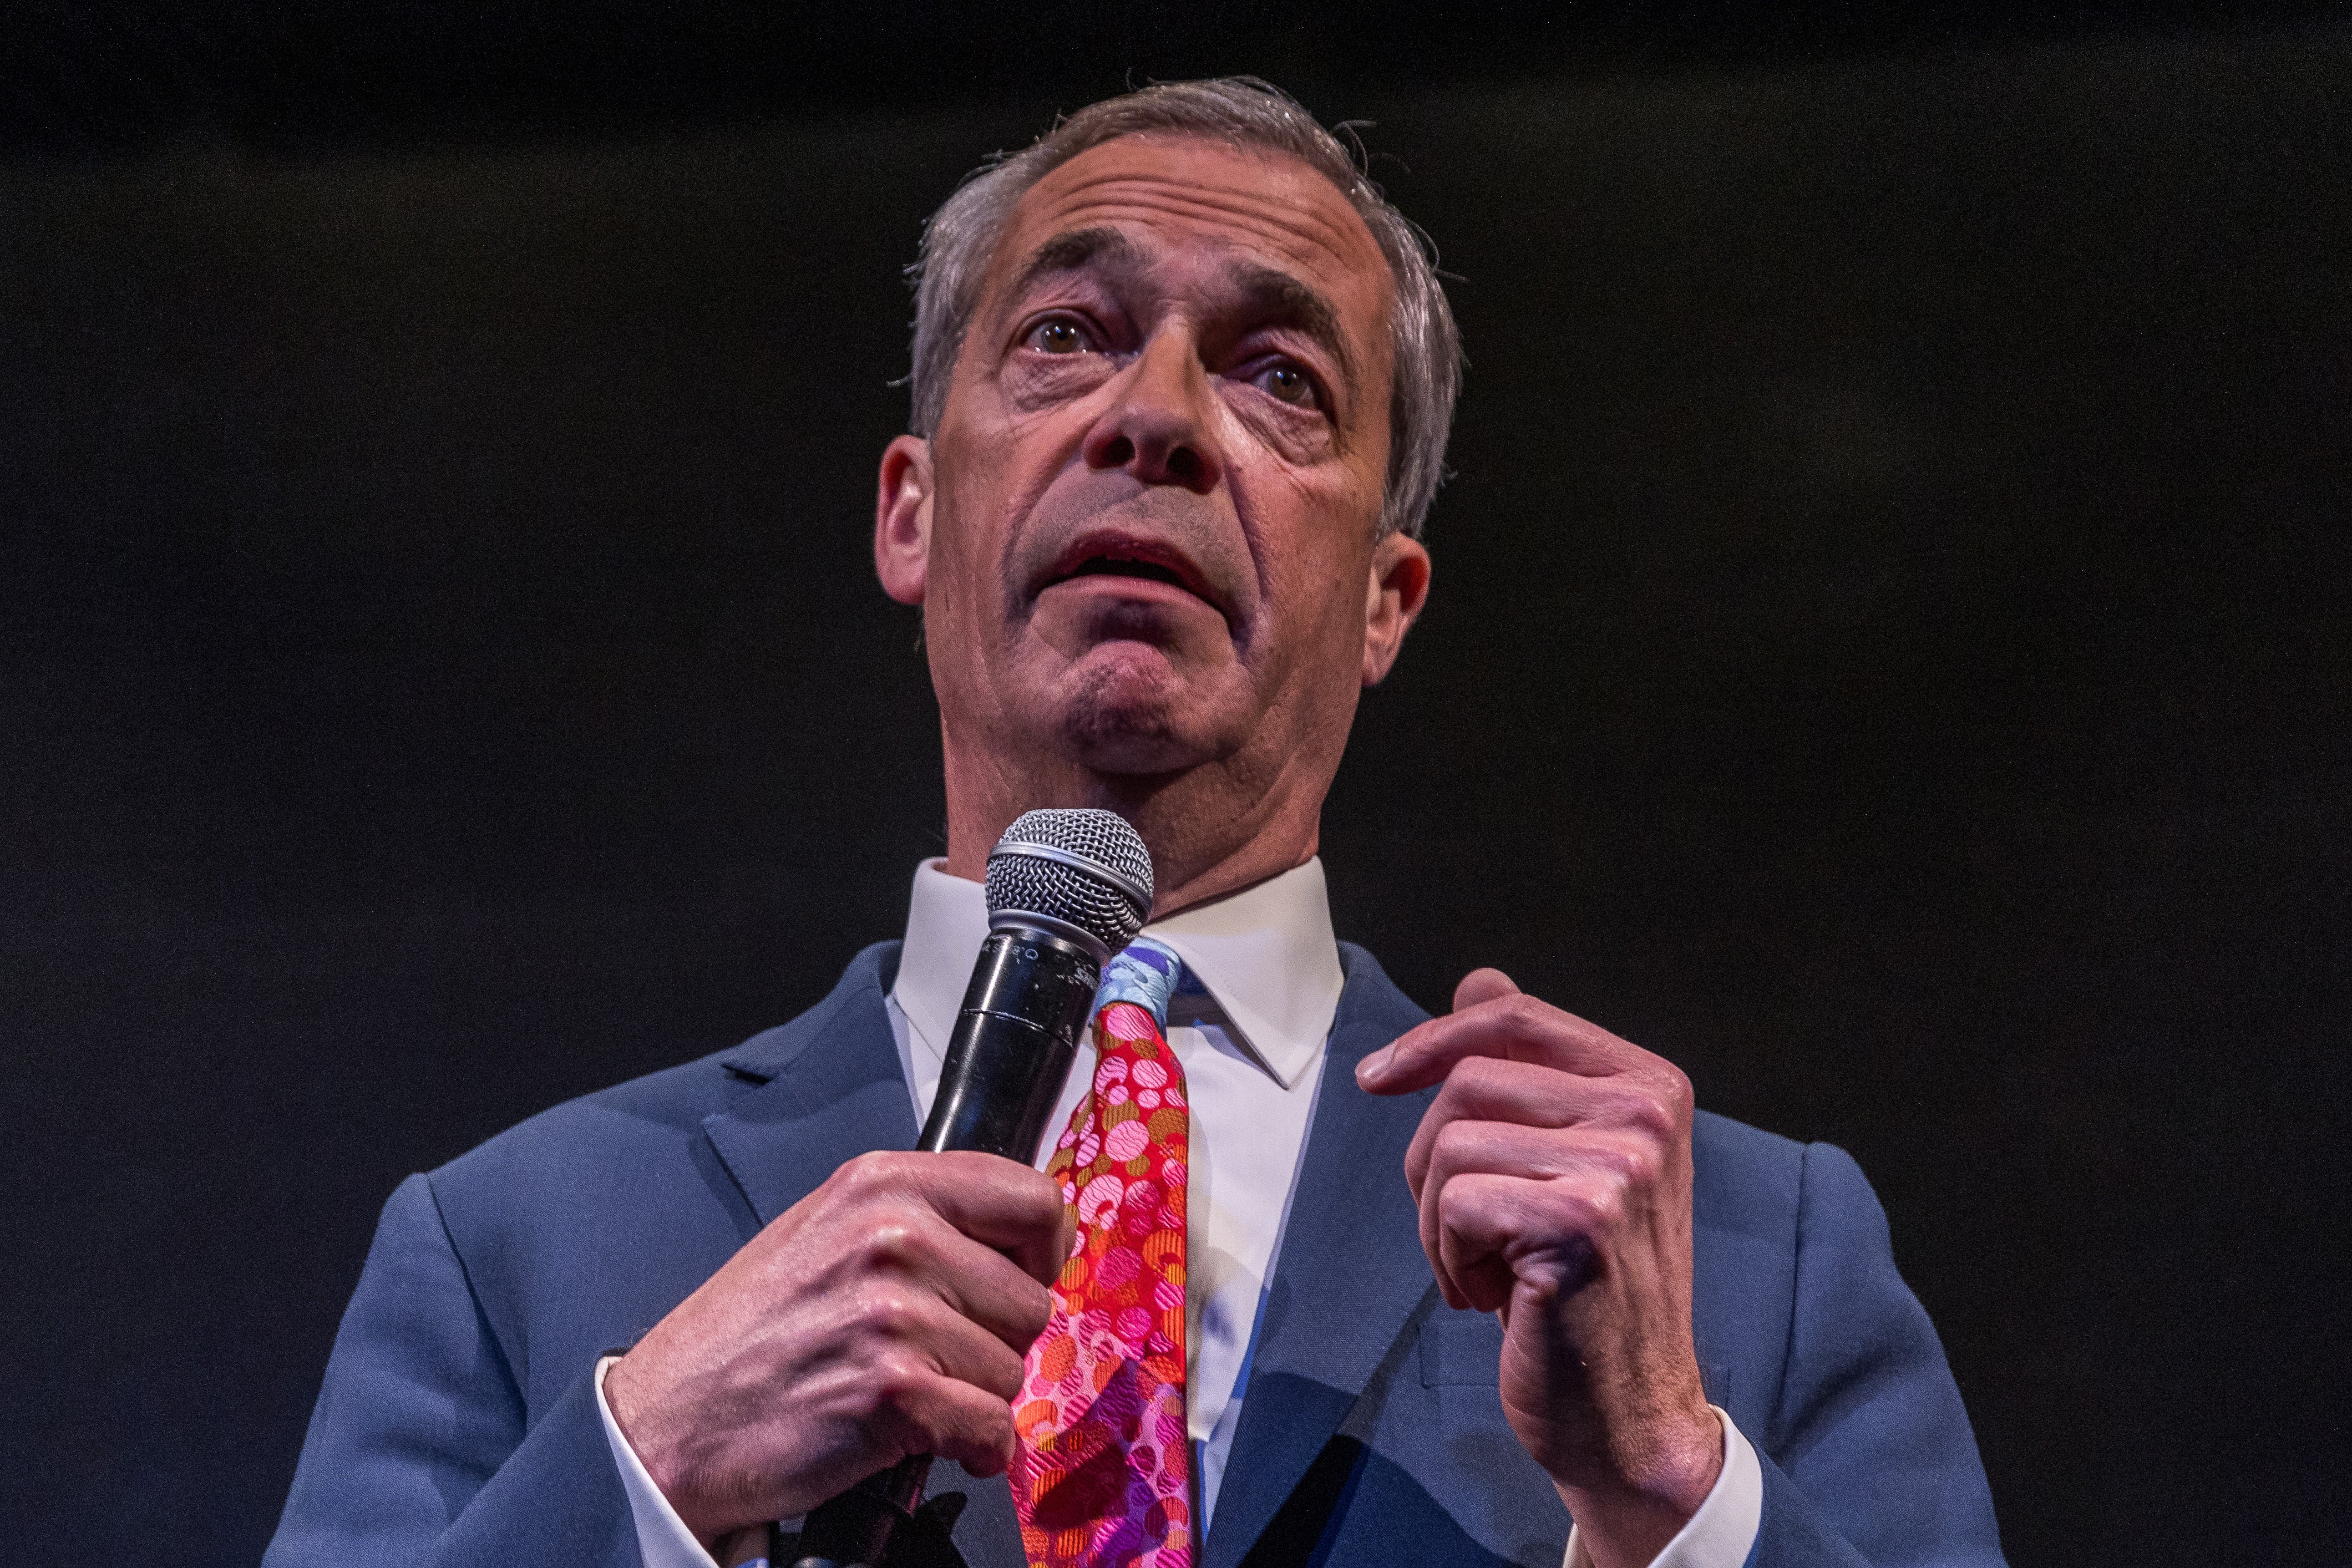 The party has made significant progress without having Nigel Farage as its formal leader